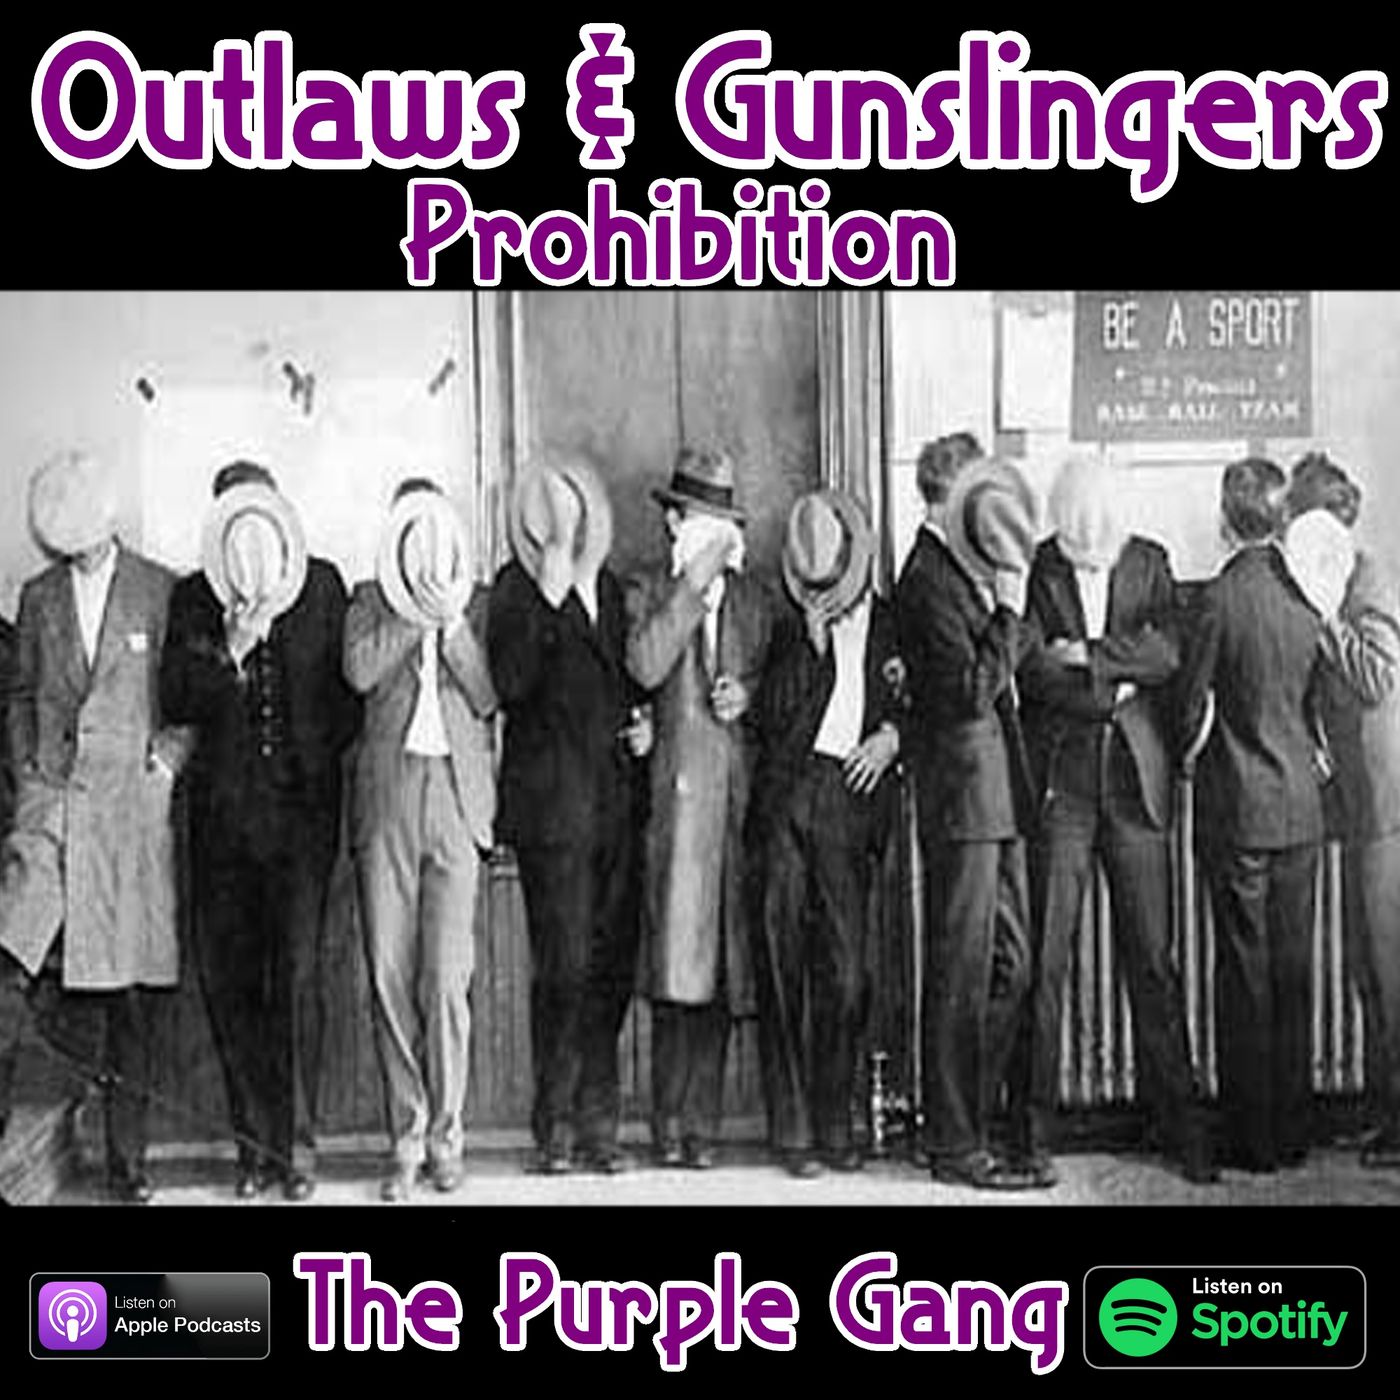 Prohibition - The Purple Gang